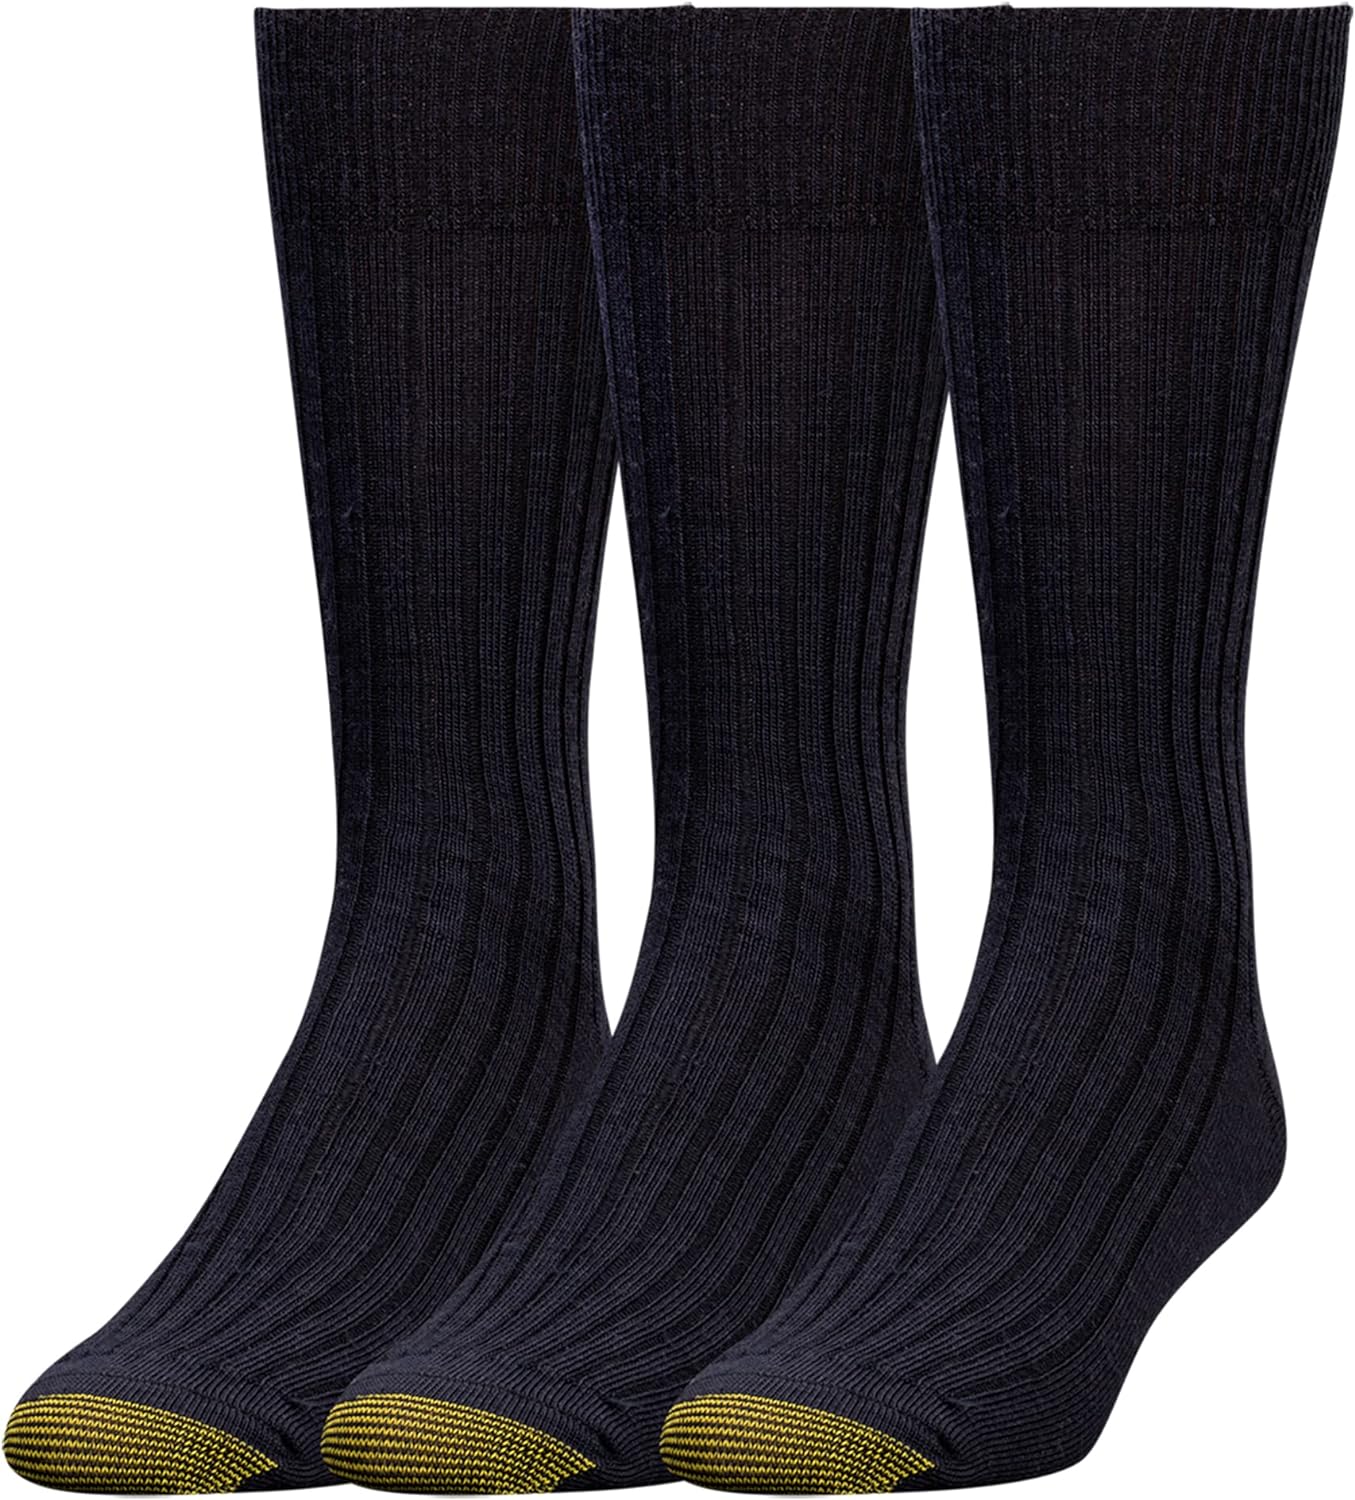 There are tons of great wool socks out there but these are really great because they are thin, warm and durable. Bulky wool socks can feel tight in boots. These leave room to move, provide that great wooly warmth and prevent blisters. They are great for skiing. These are my husbands favorite socks!